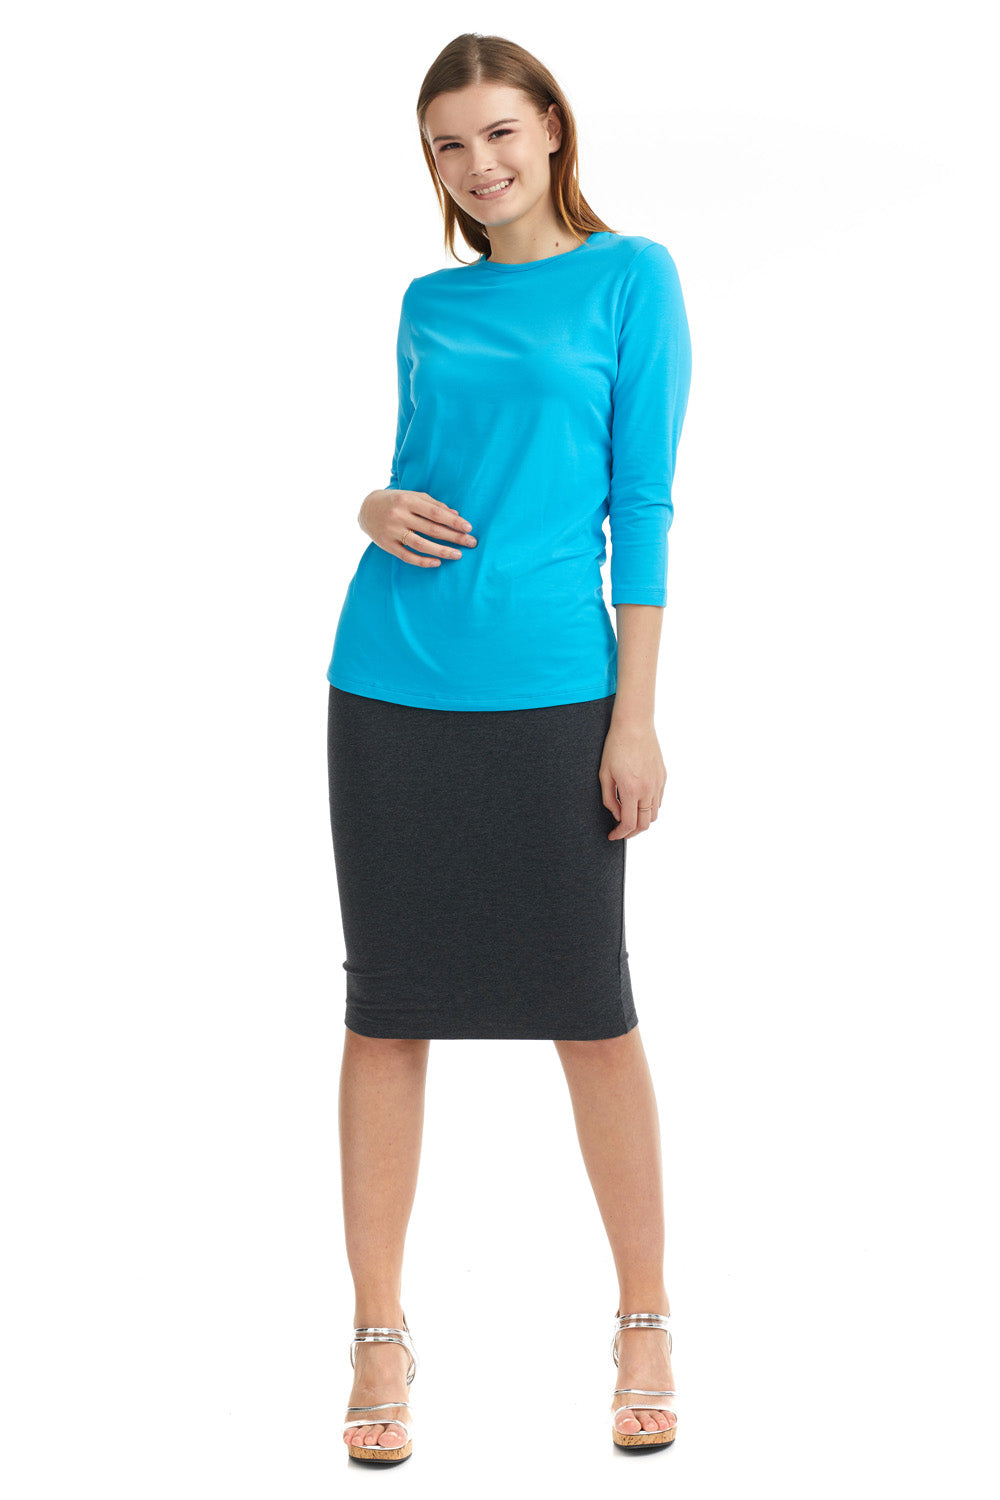 Stylish and Modest Women's Clothing for Everyday Comfort and Confidence